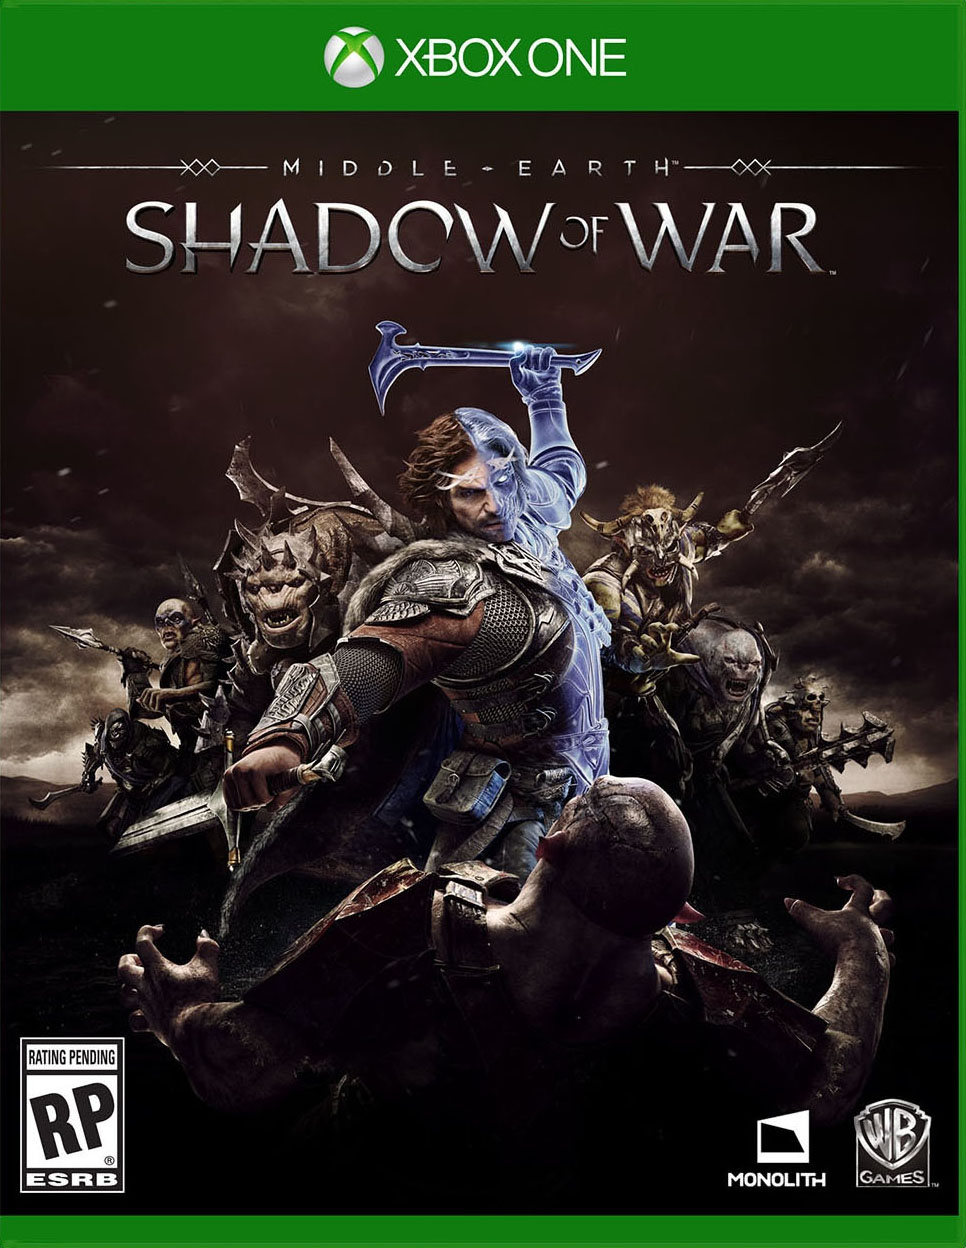 XBOX ONE - Middle-earth: Shadow of War